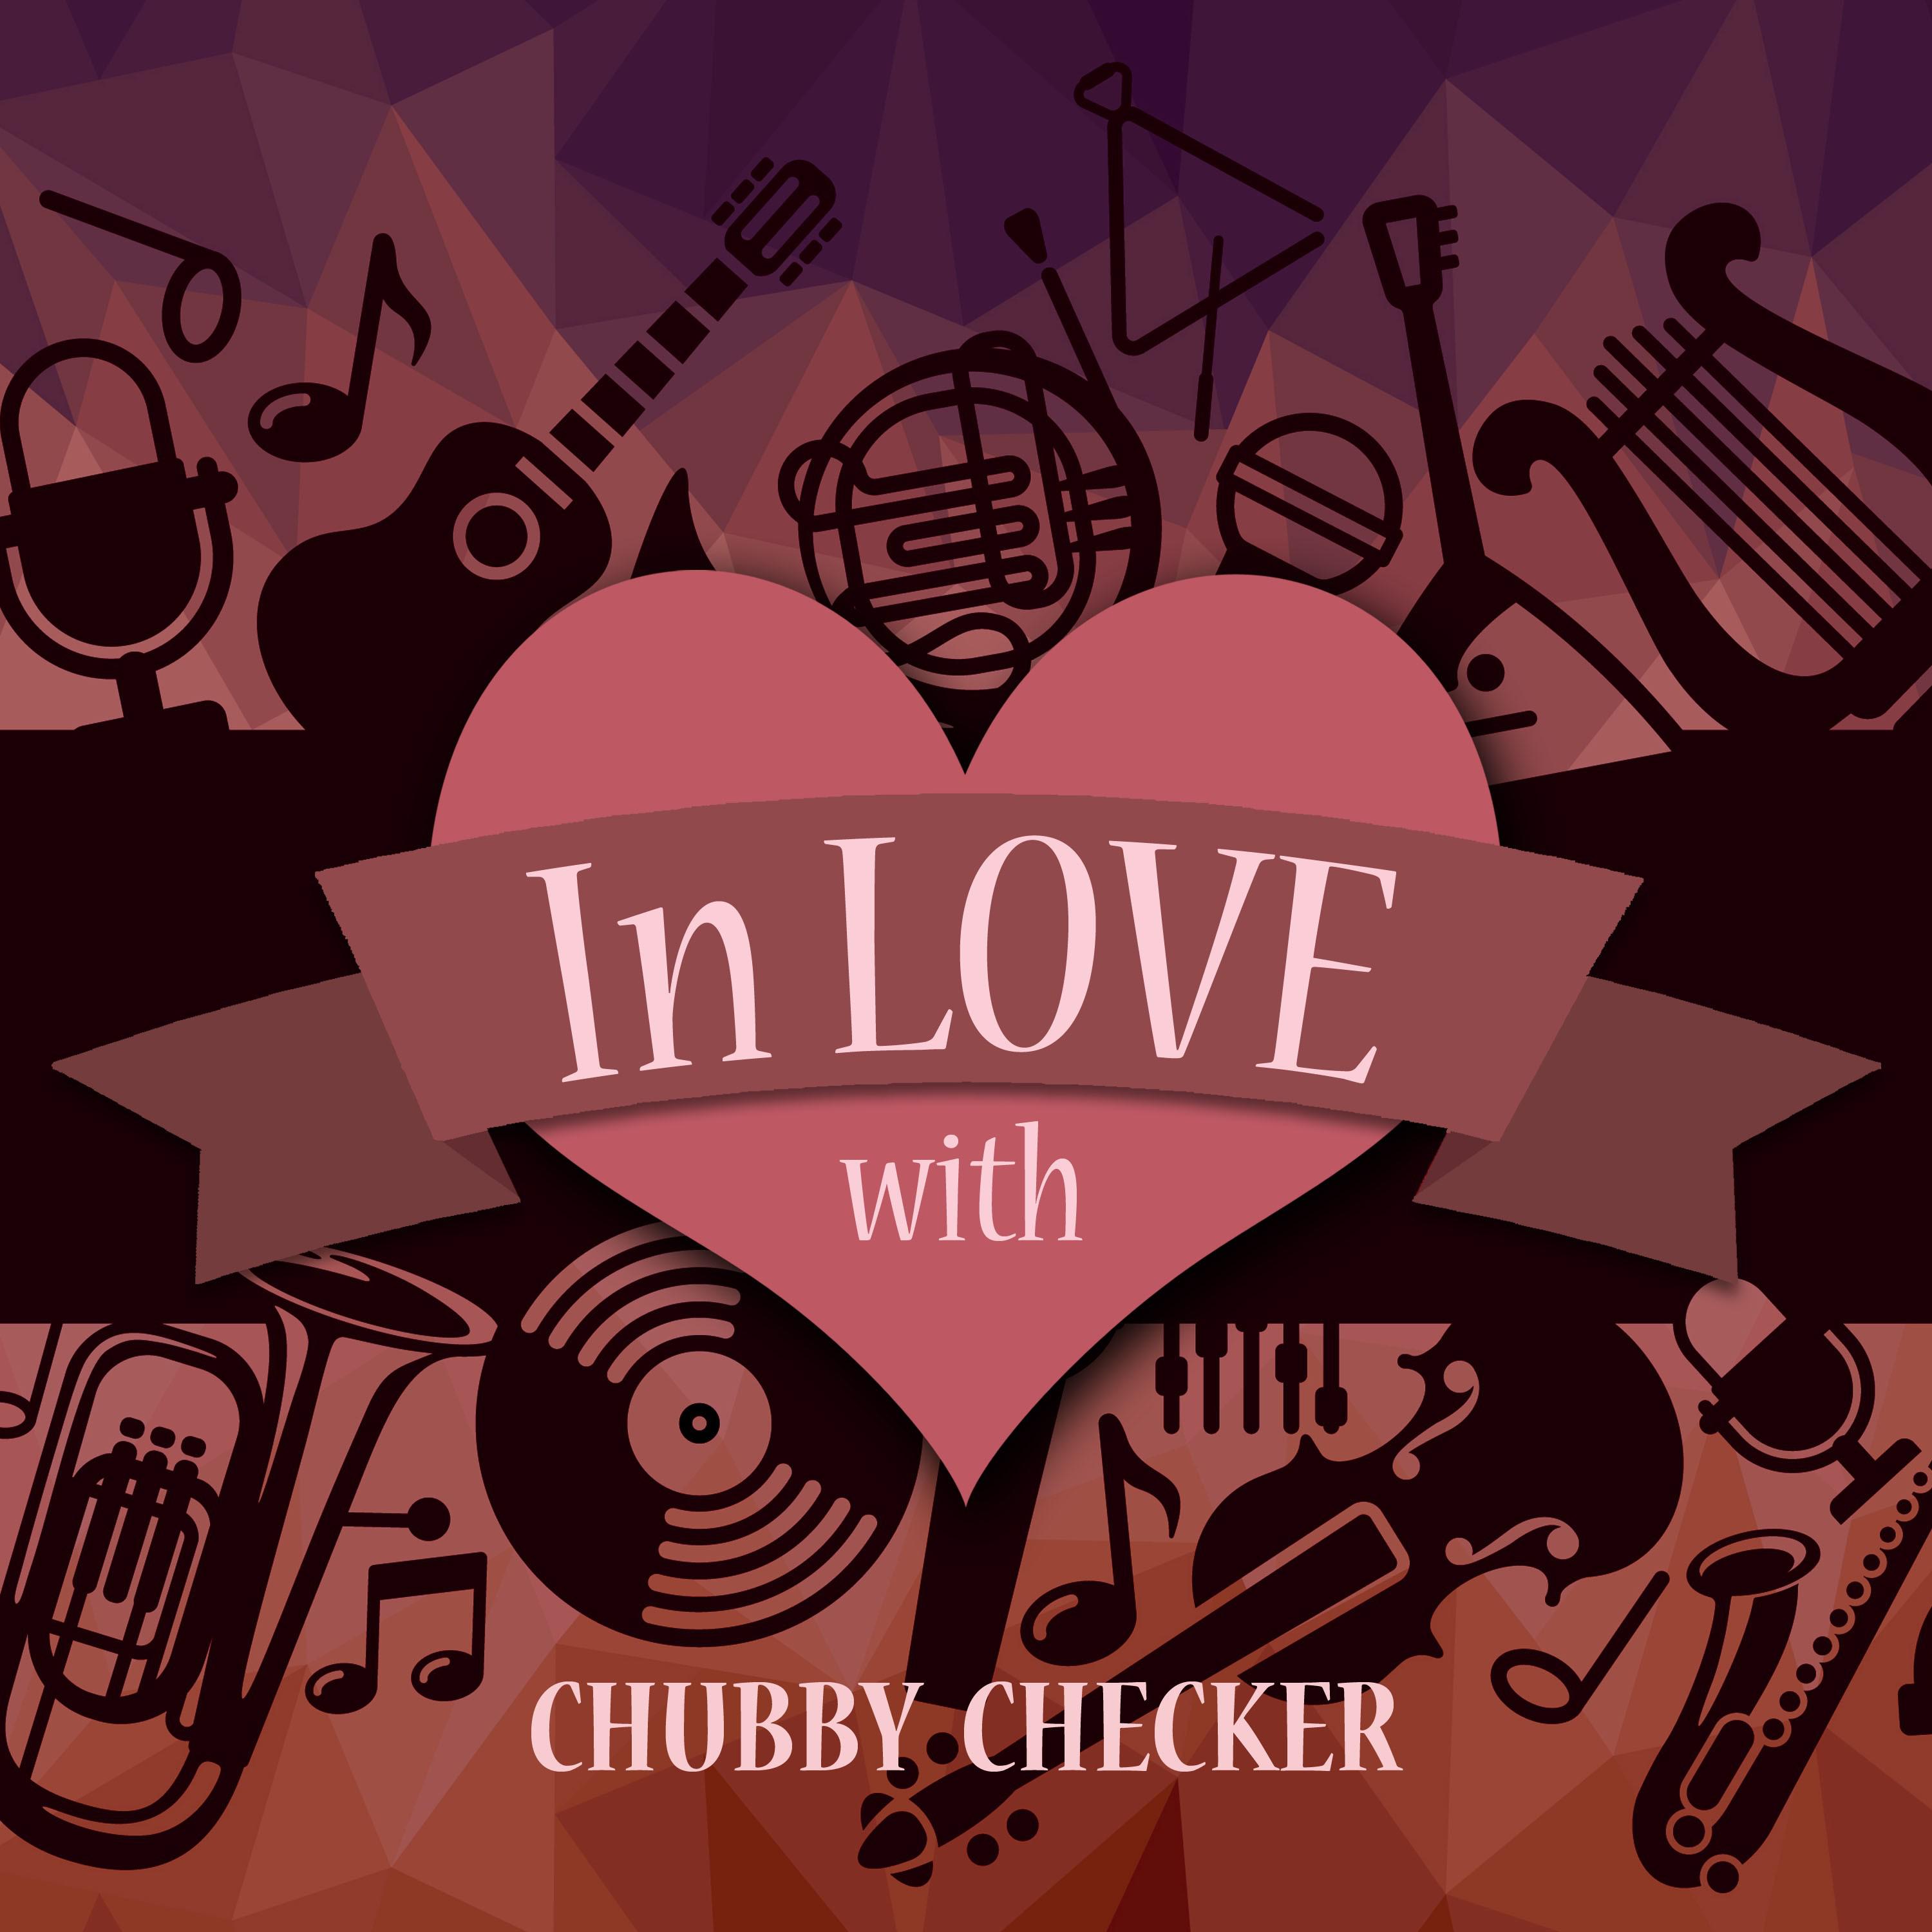 In Love with Chubby Checker